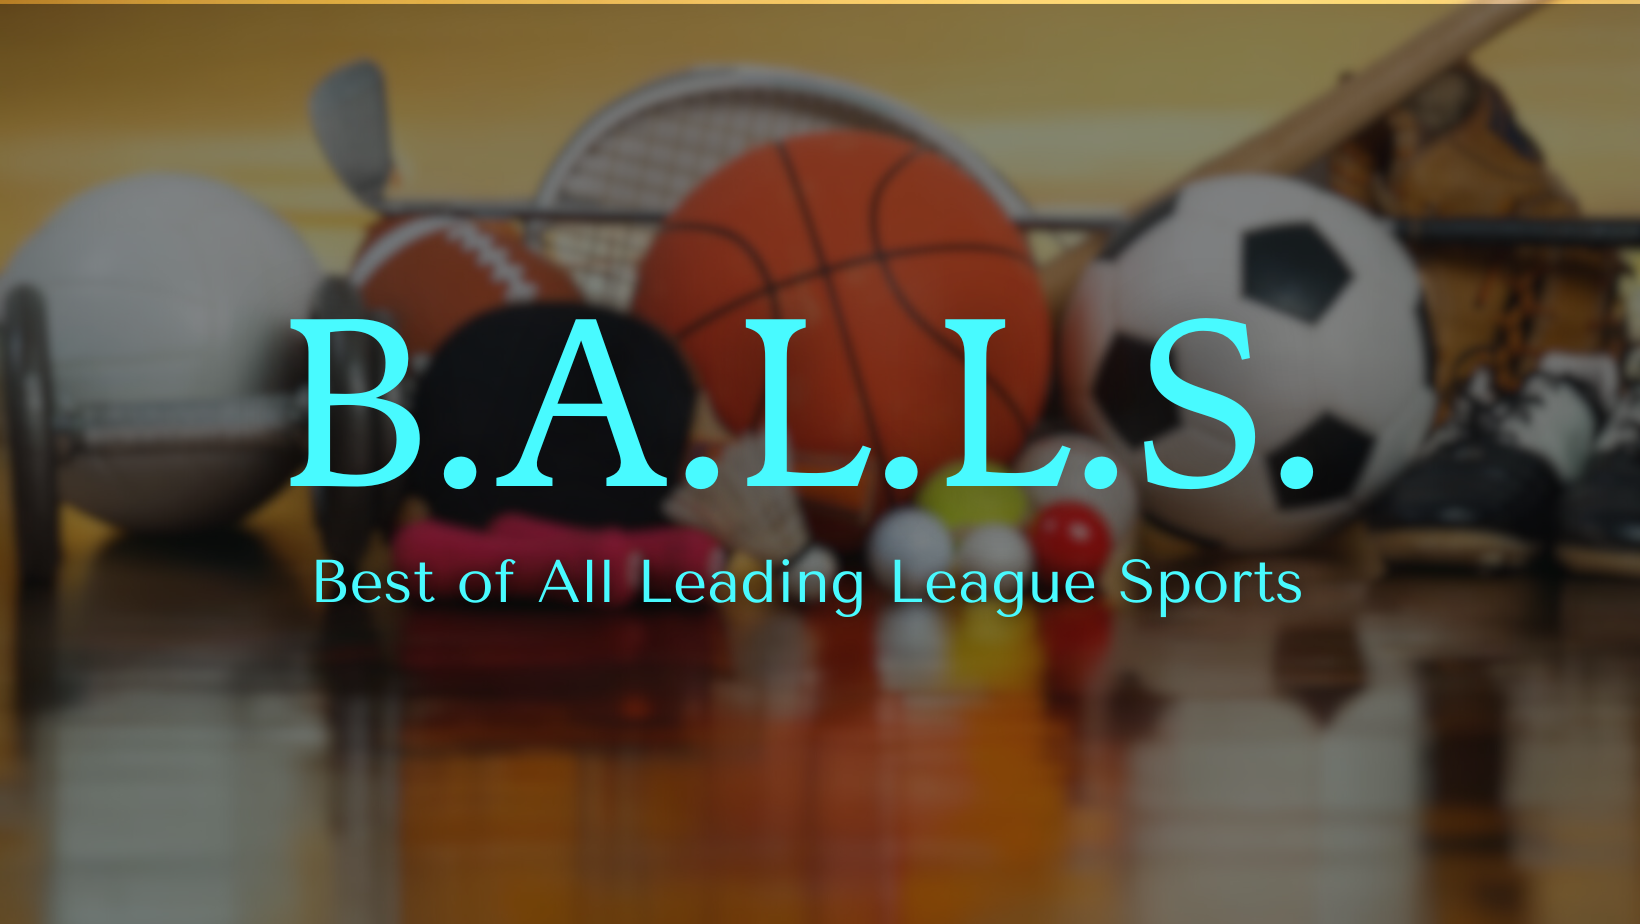 Best of All Leading League Sports